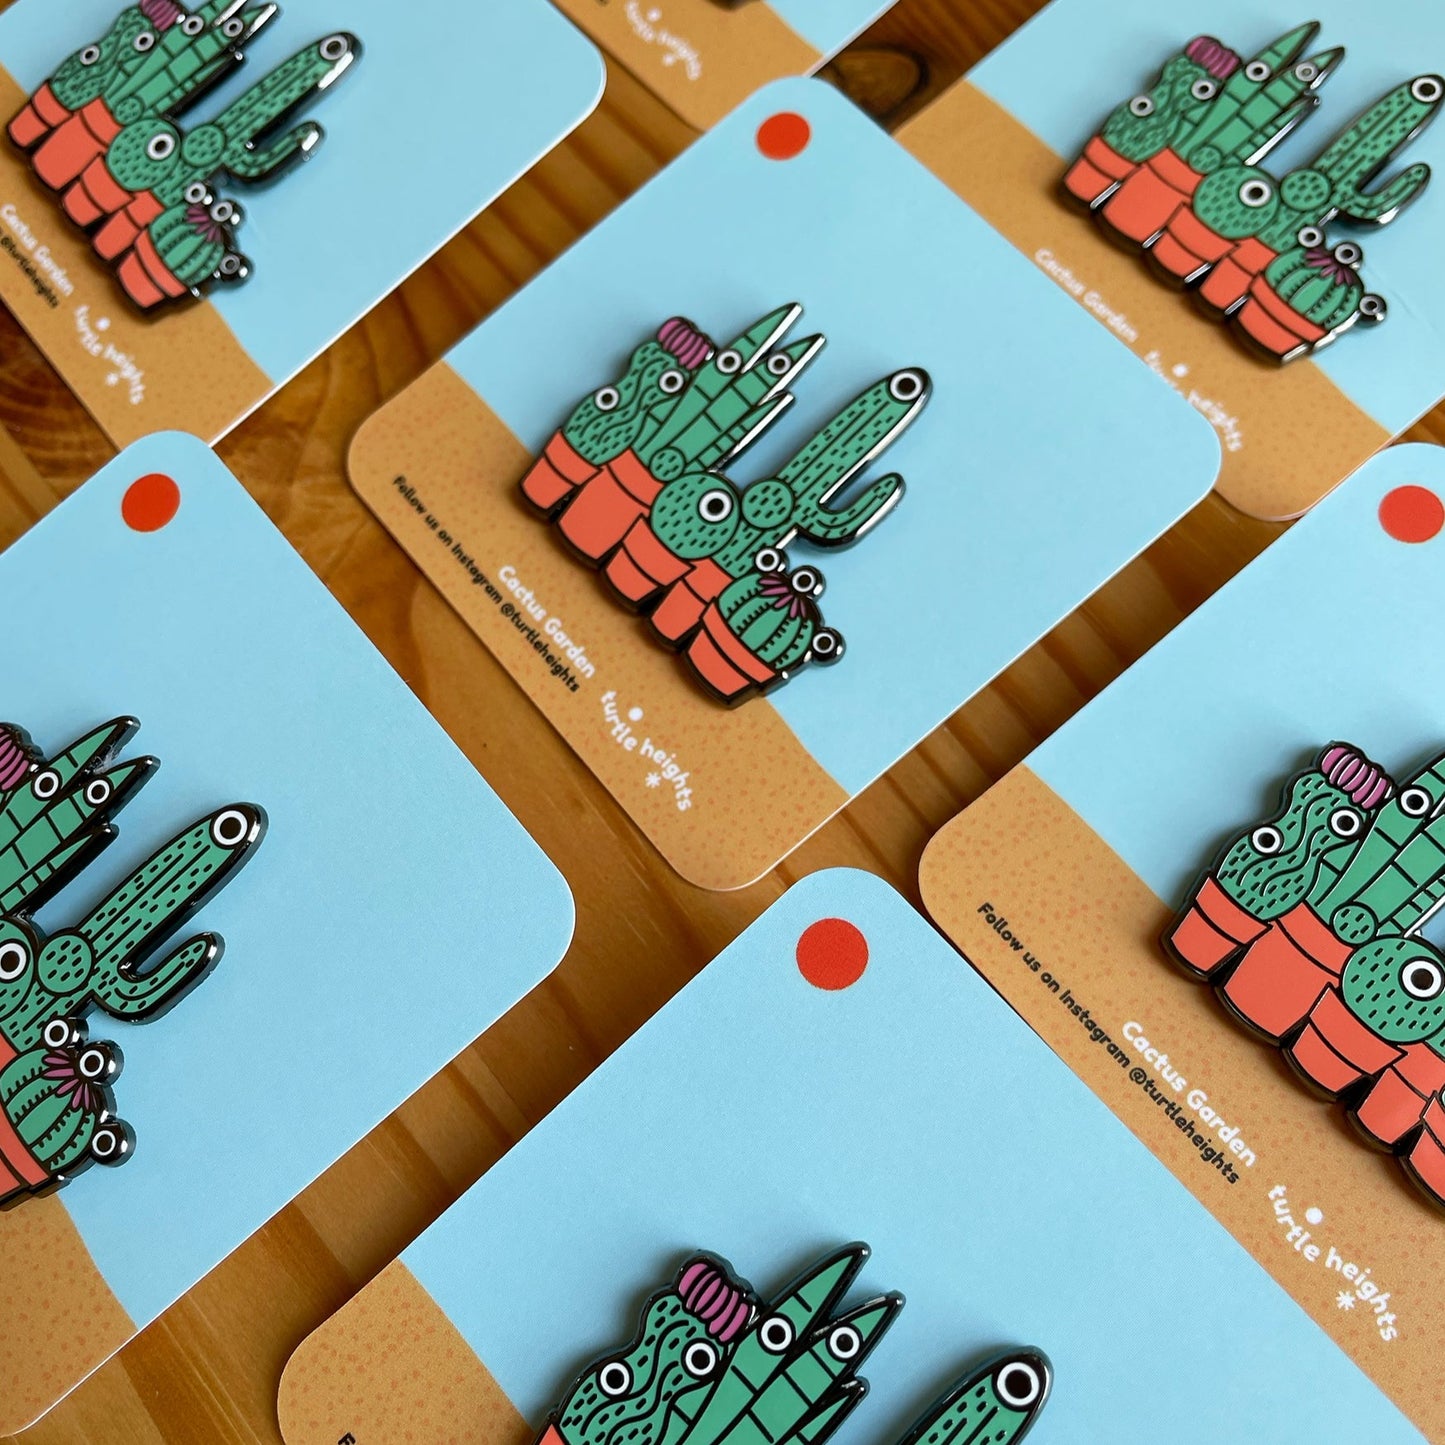 Cactus Garden Hard Enamel Pin on Backing Card with "Turtle Heights" Text